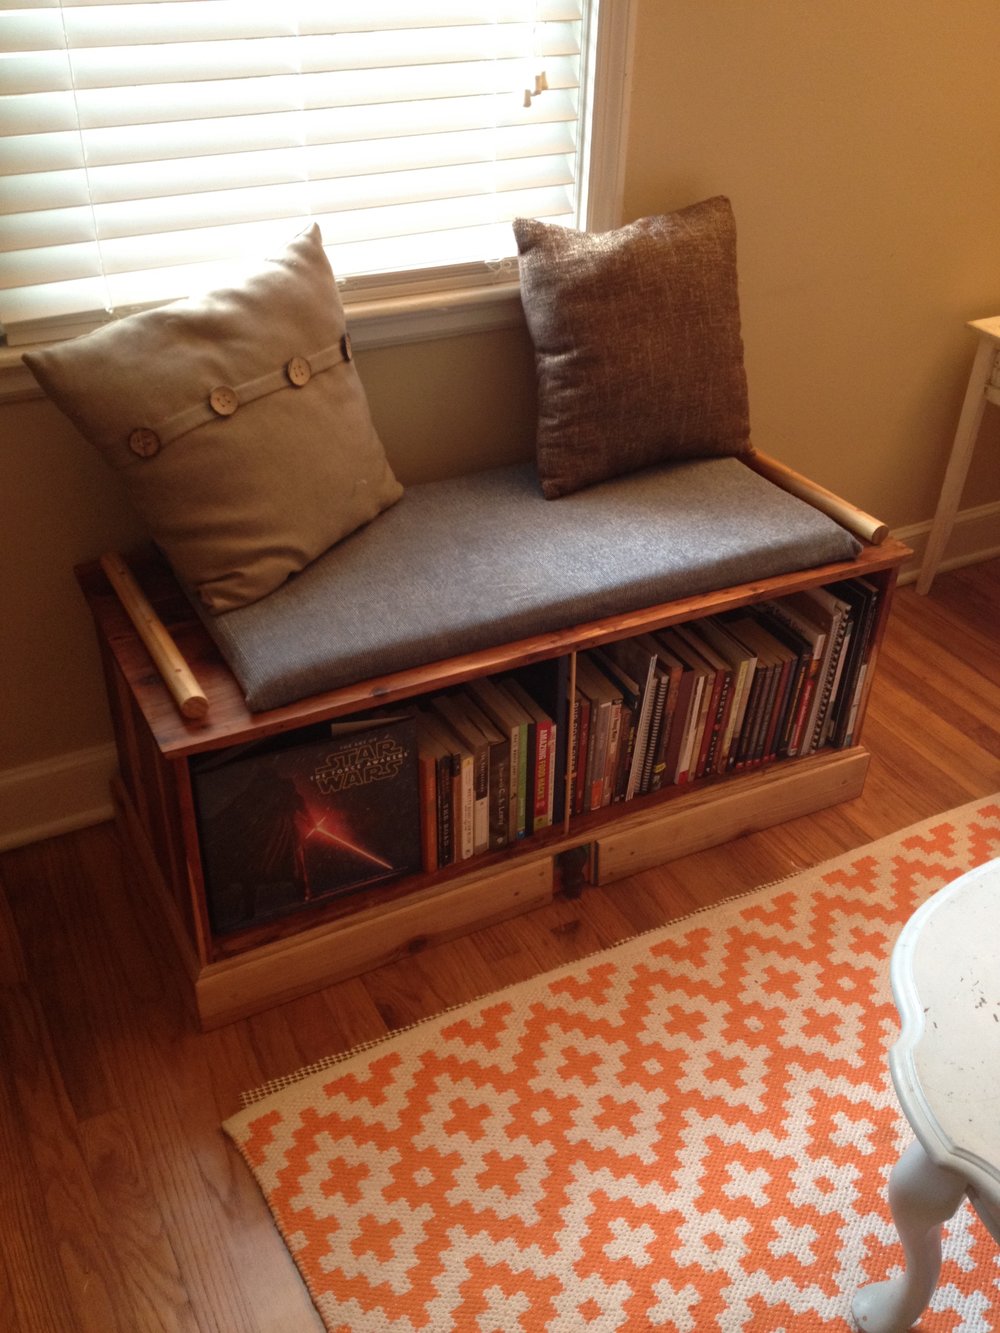  And the finished product! I added a little cushion too, for sittin', with plywood, $3 foam, and bought fabric. I also attached large dowel arm rails. I was going for fairly simple, classic but a hint of modern, but those rails made it middle-eastern